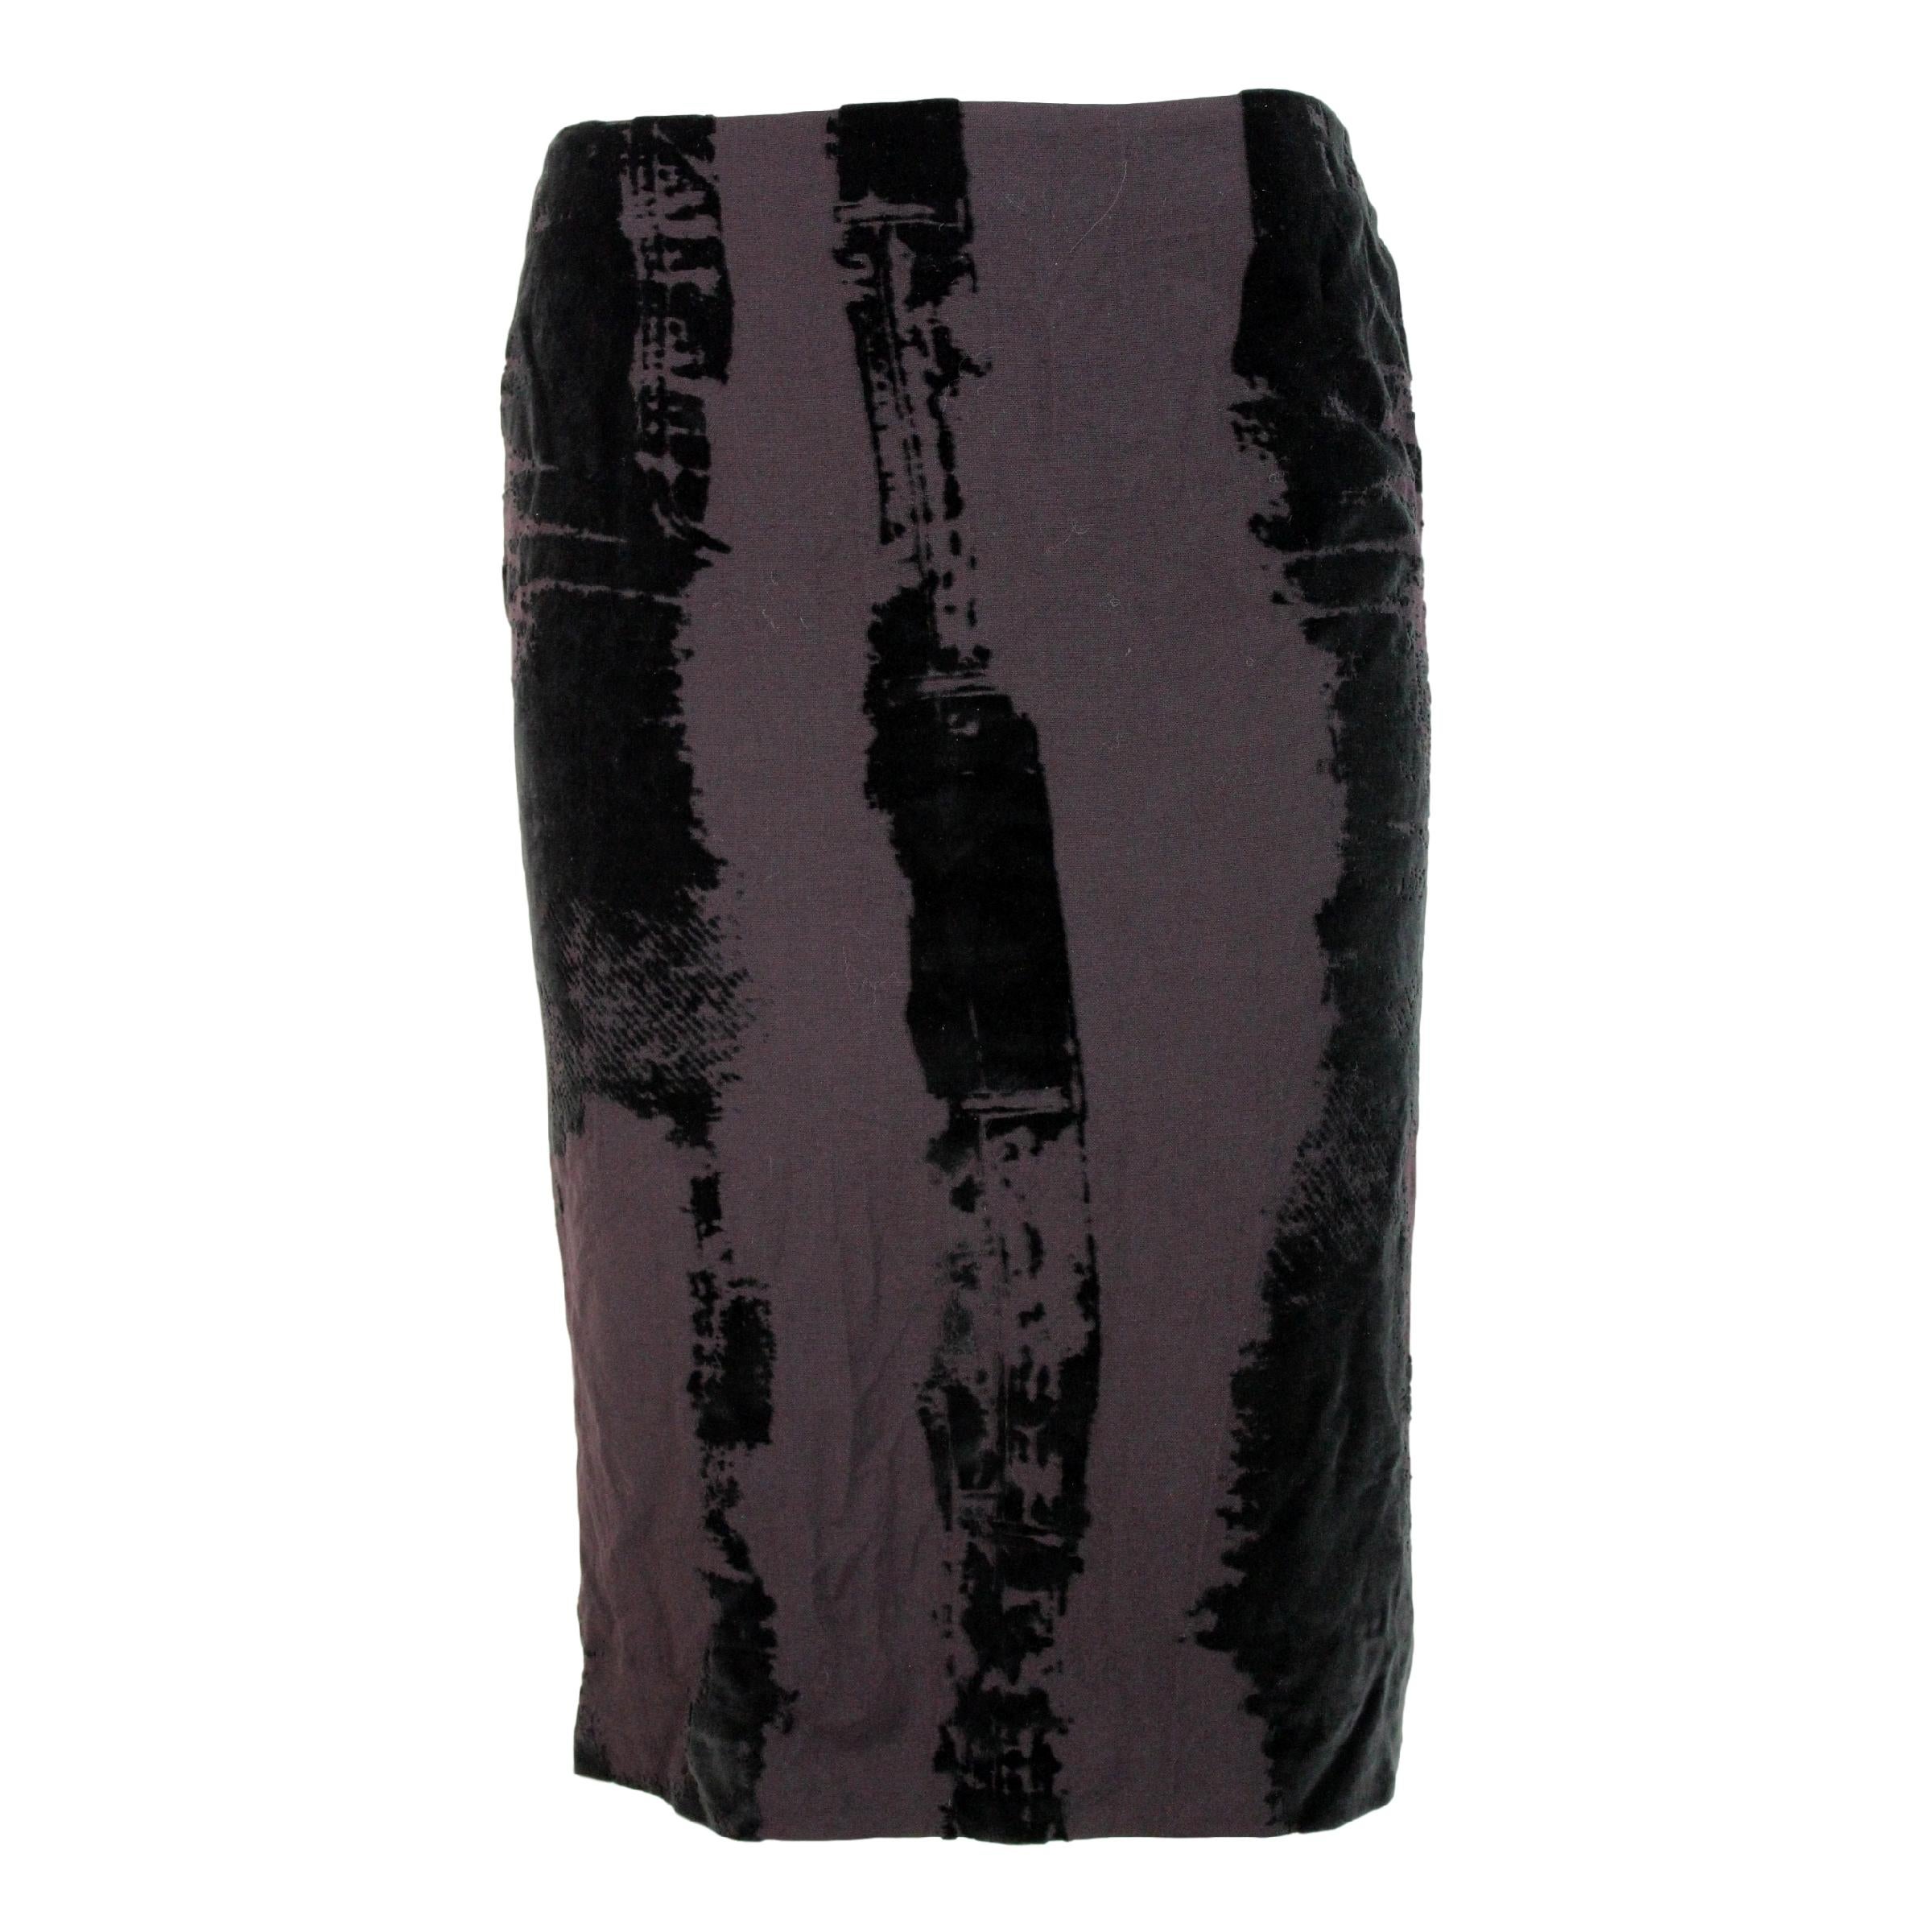 Jean Paul Gaultier 90s vintage skirt, black and brown. Knee length skirt, 65% wool and 35% cotton fabric, fully lined with 100% cotton. The skirt is characterized by velvet-like cotton parts that depict pockets and streaks.

Size 42 IT 8 US 10